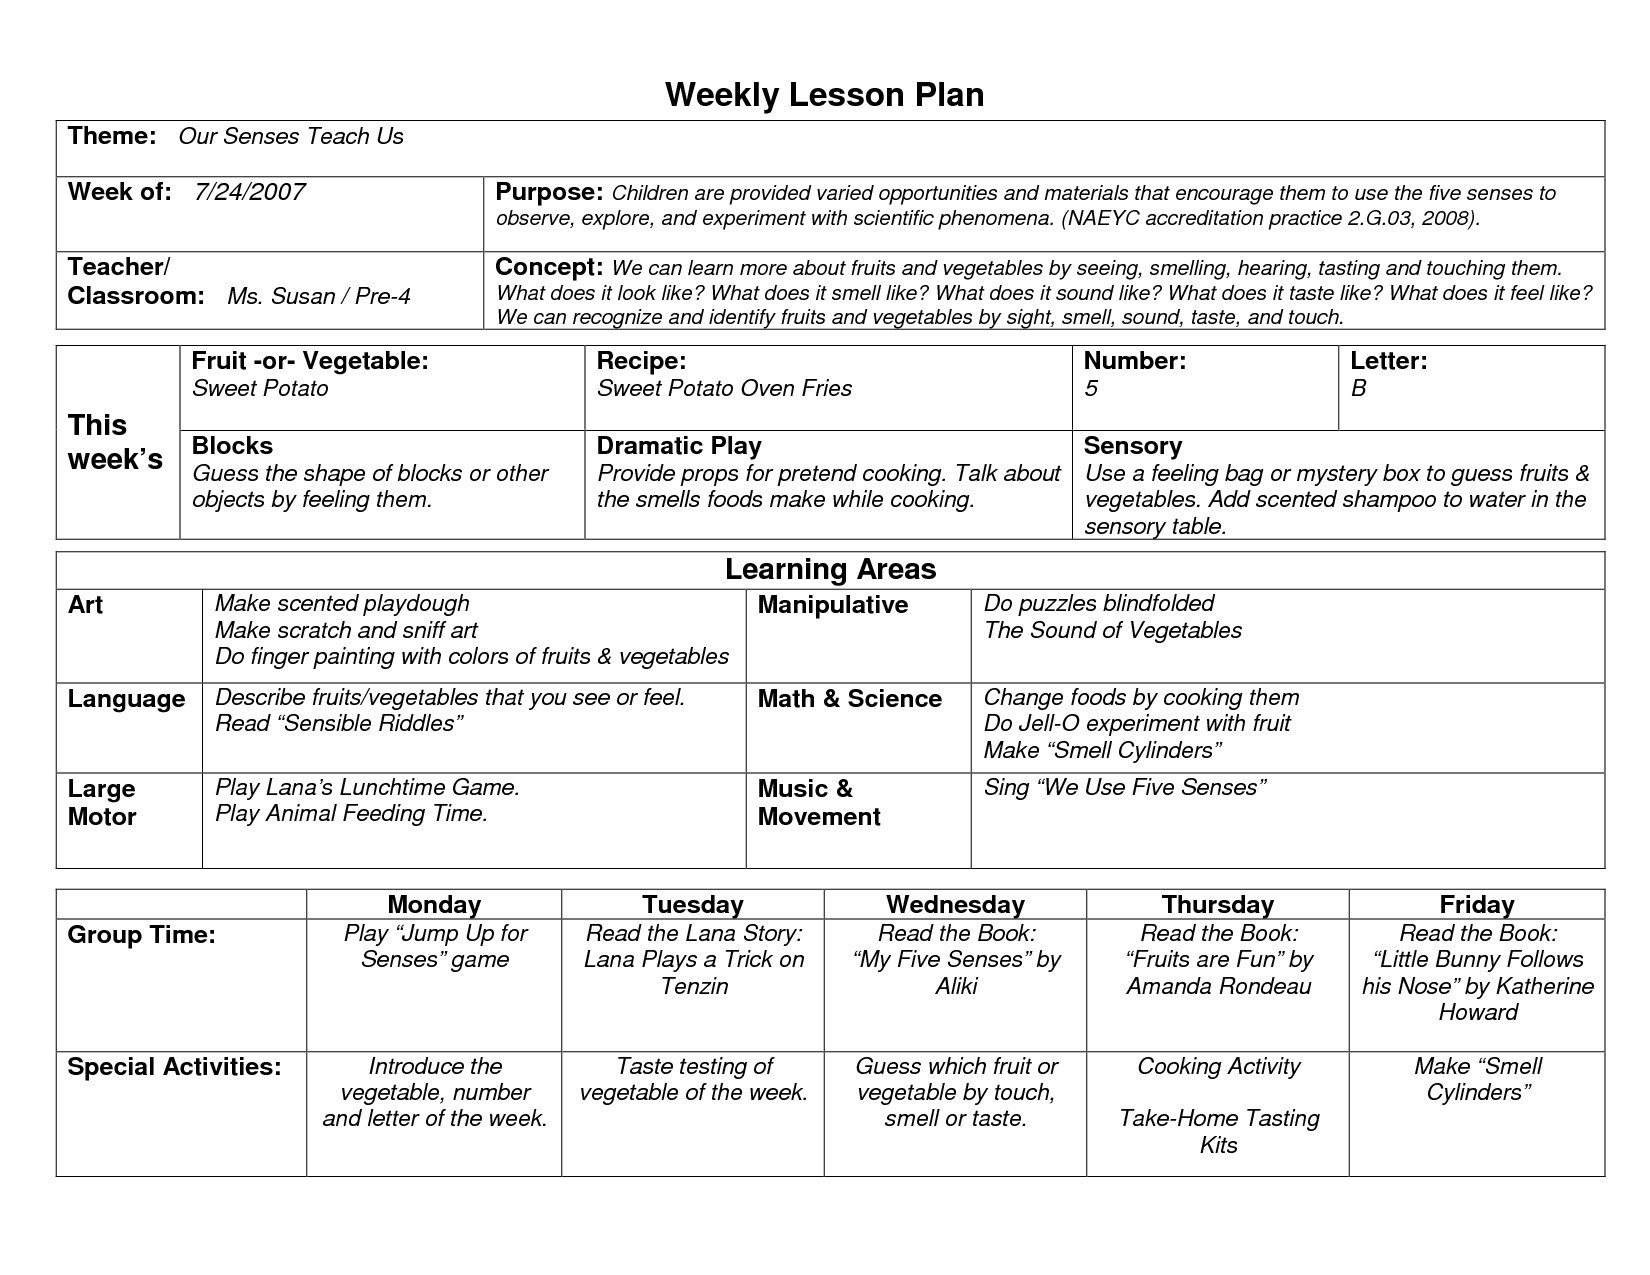 Lesson Plan Sample How to Write Objectives for Preschool Lesson Plans